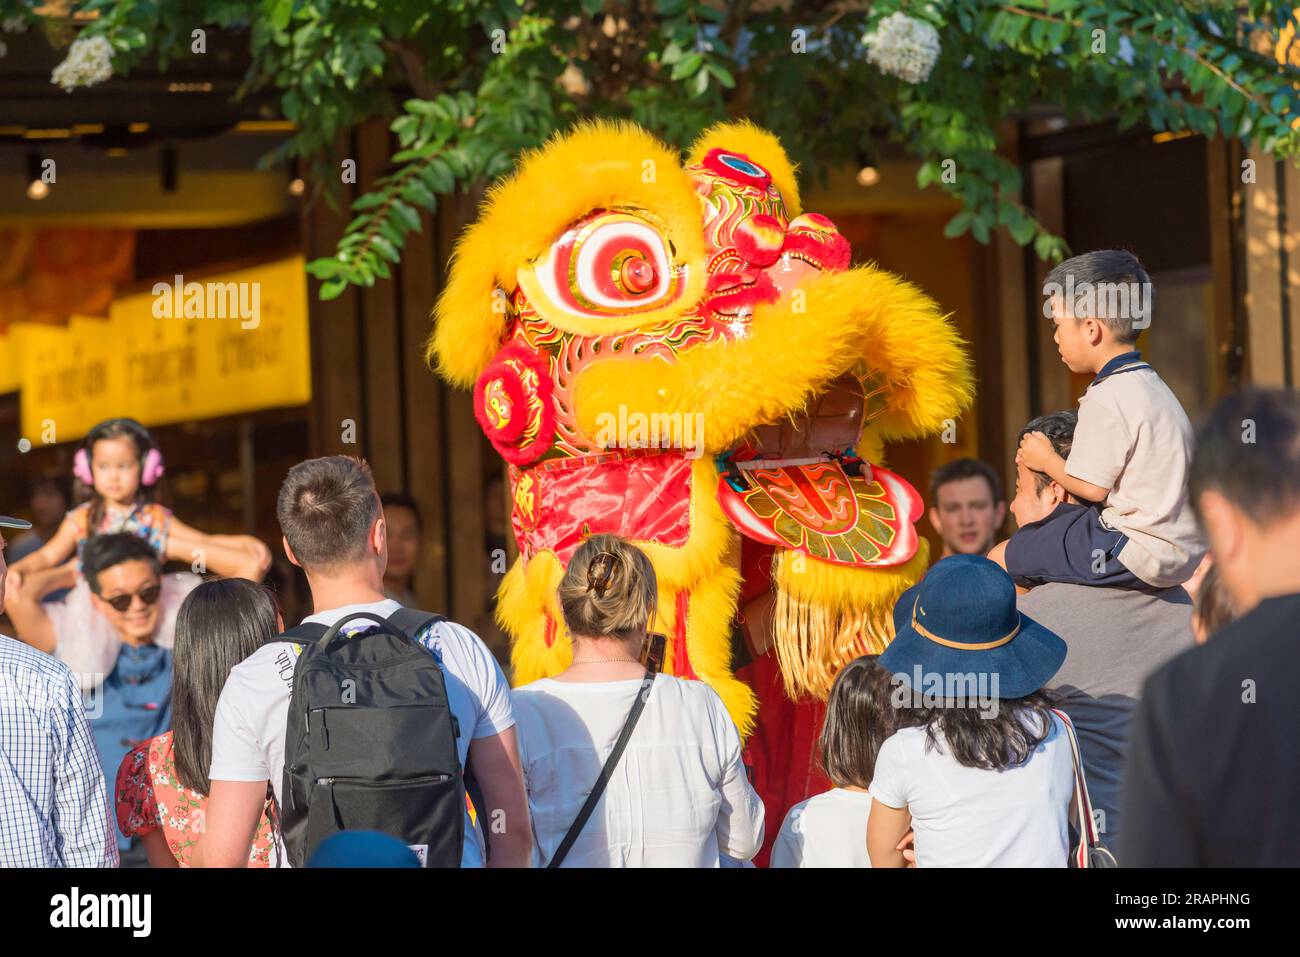 A Chinese Dragon dance performing up close to a young child during Lunar (Chinese) New Year in Sydney's Darling Quarter in Australia Stock Photo